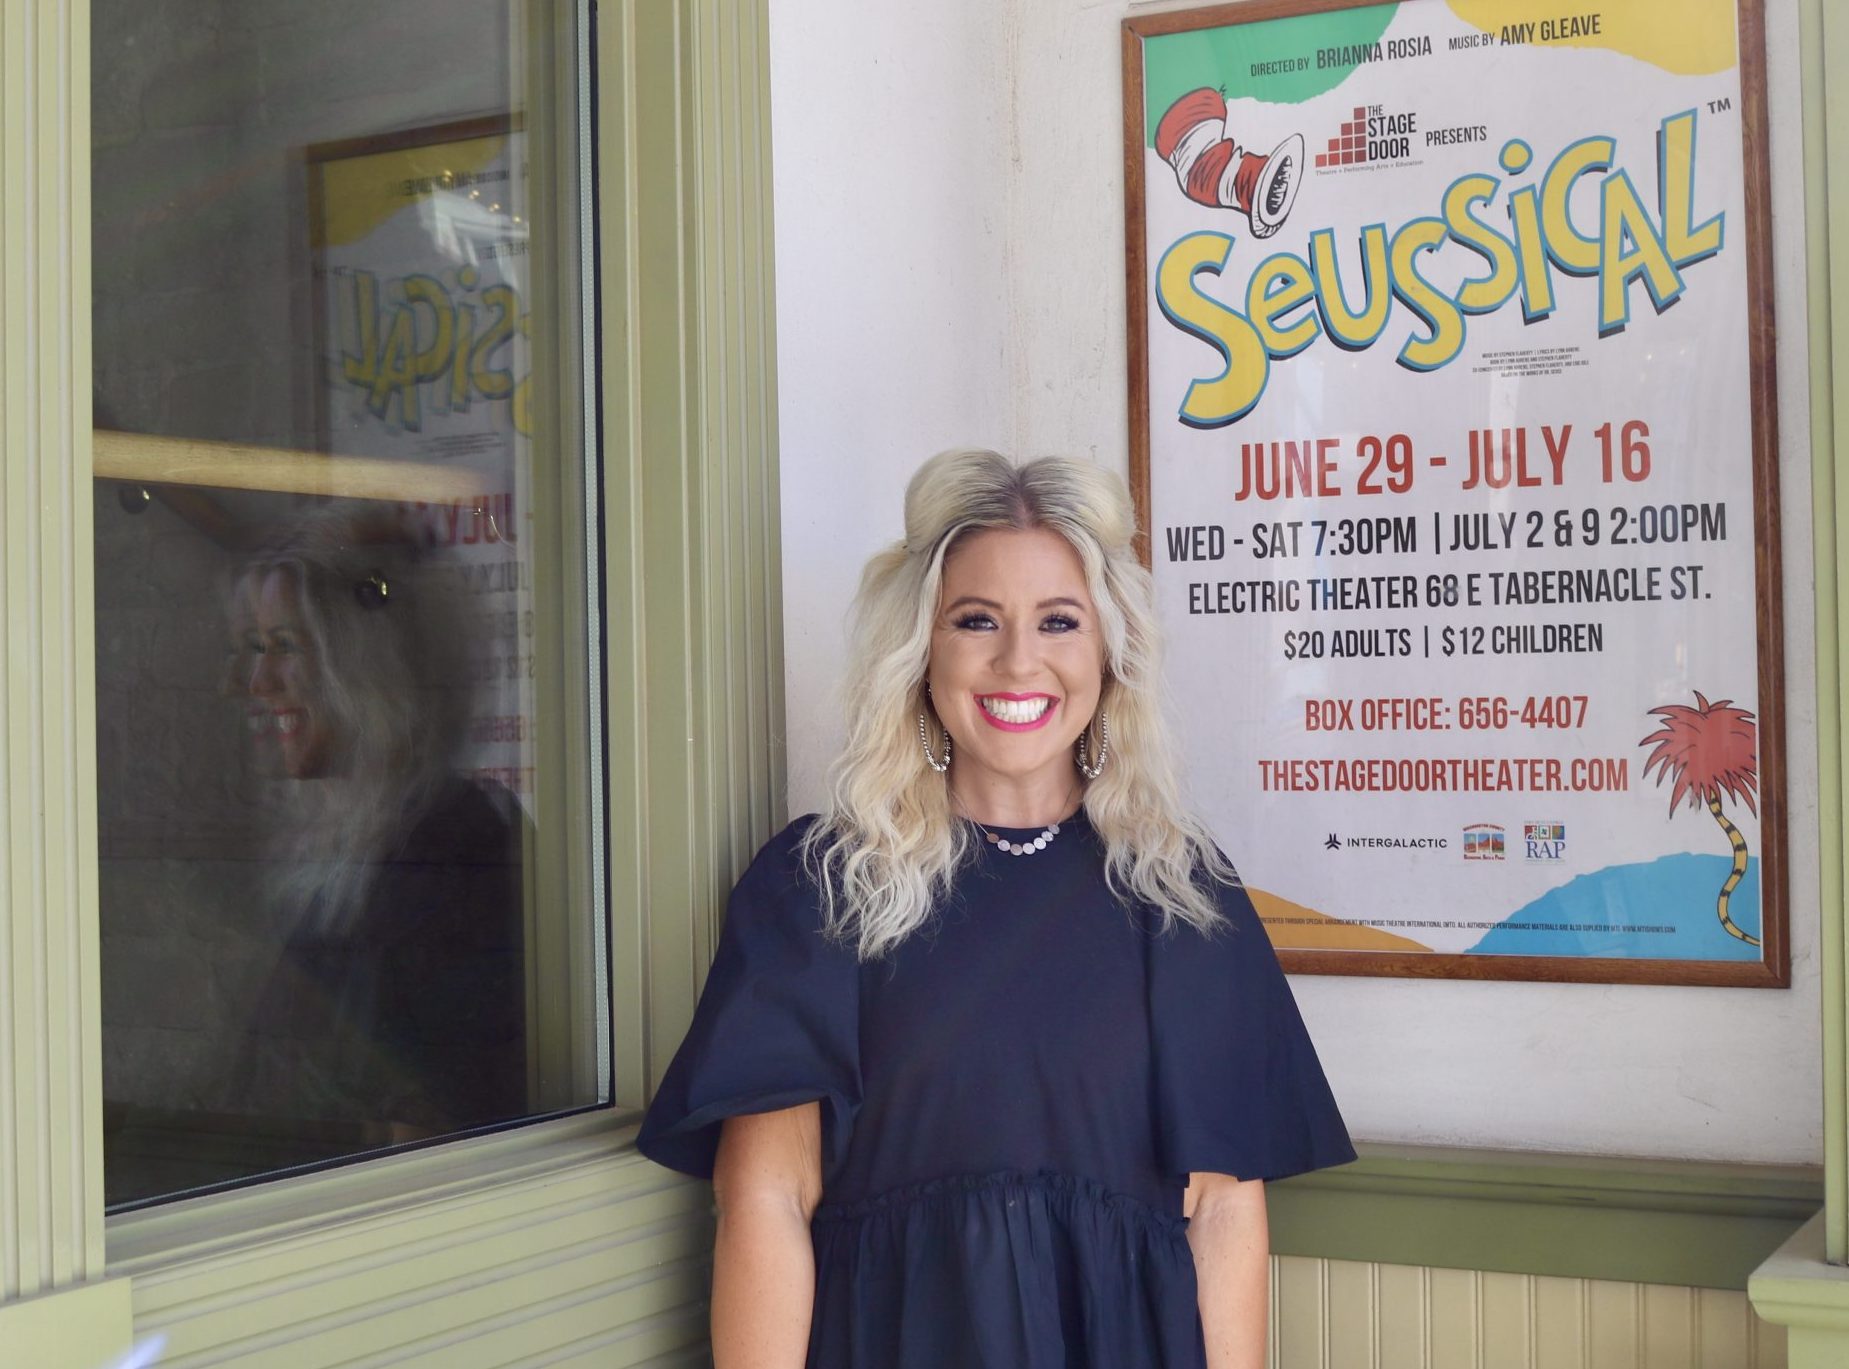 Brianna Rosia, director of "Seussical," proudly standing next to his musical flyer outside the Electric Theater, St. Louis.  George, Utah, July 13, 2022 |  Photo by Jessi Bang, St.  George News